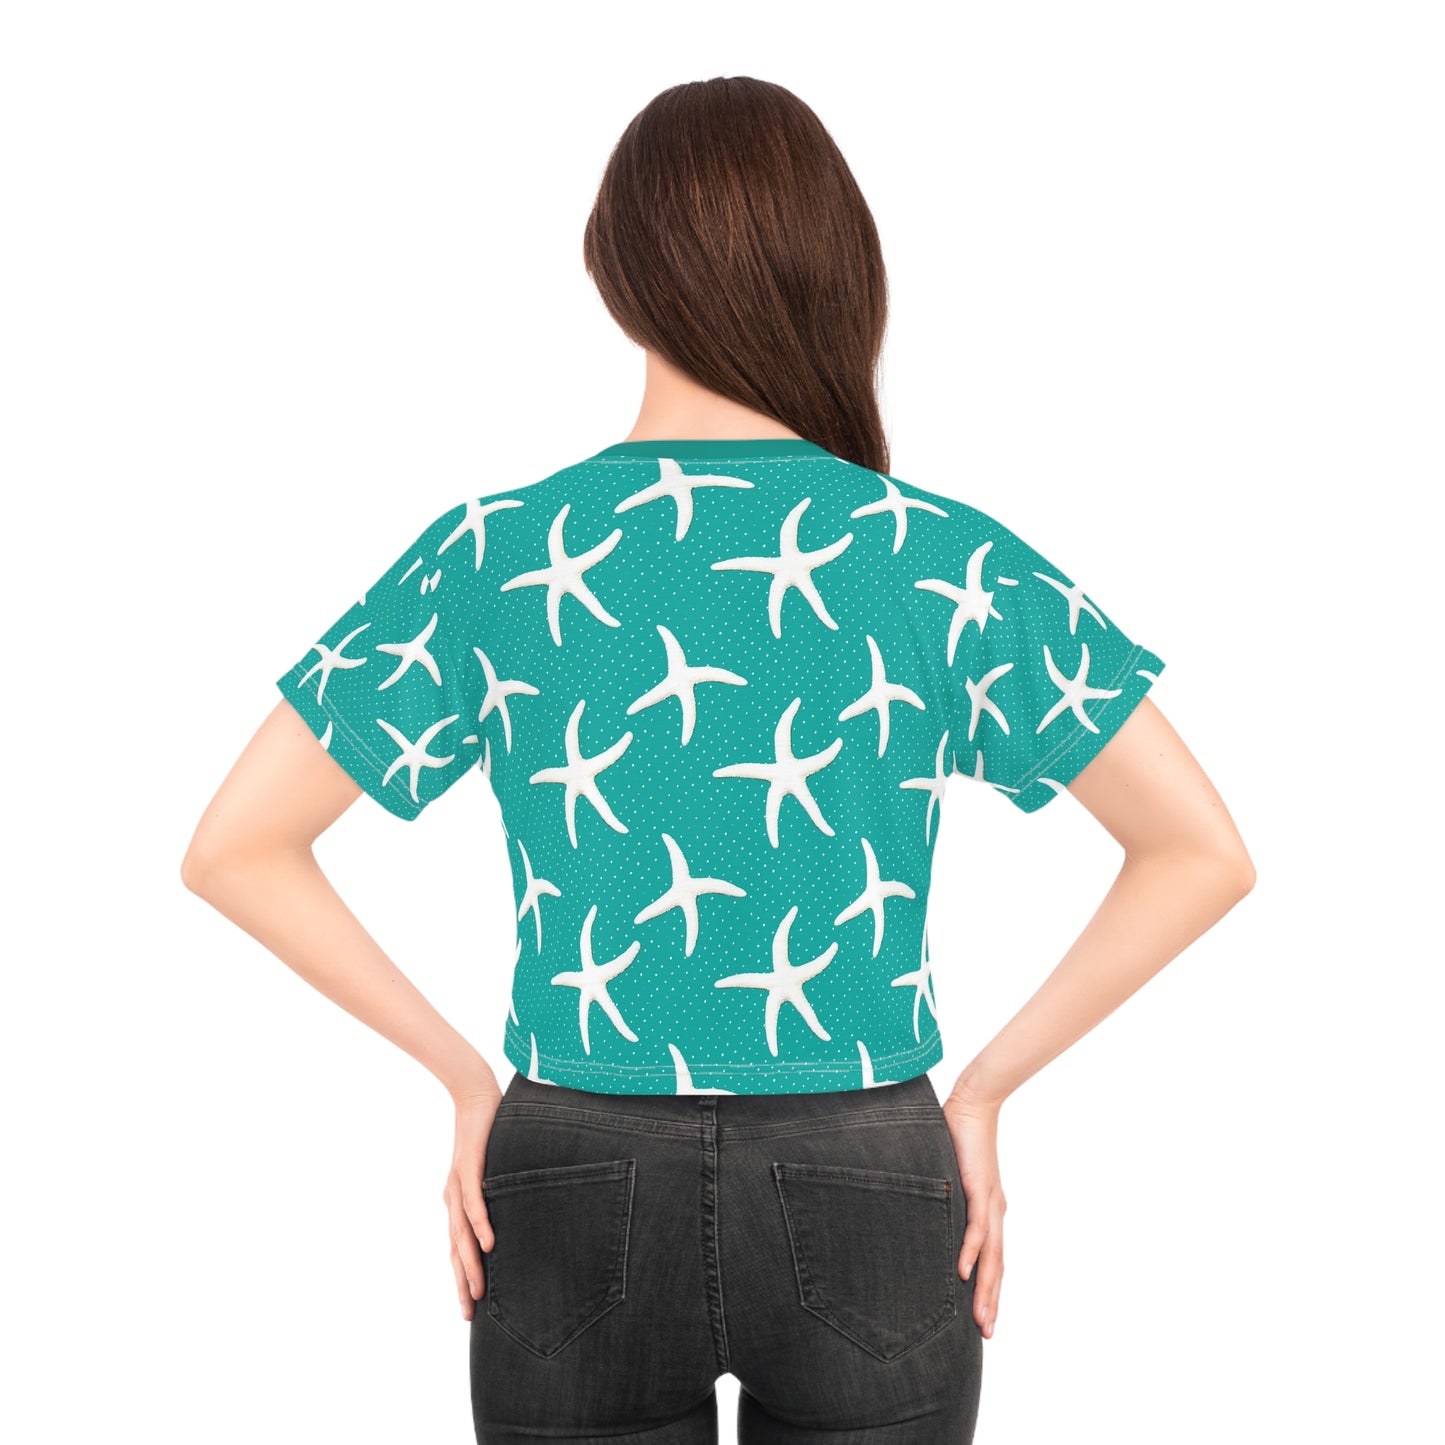 Stay Cool and Stylish: Summer Aqua  Crop Tees for Women - Trendy, Casual, and Comfortable!